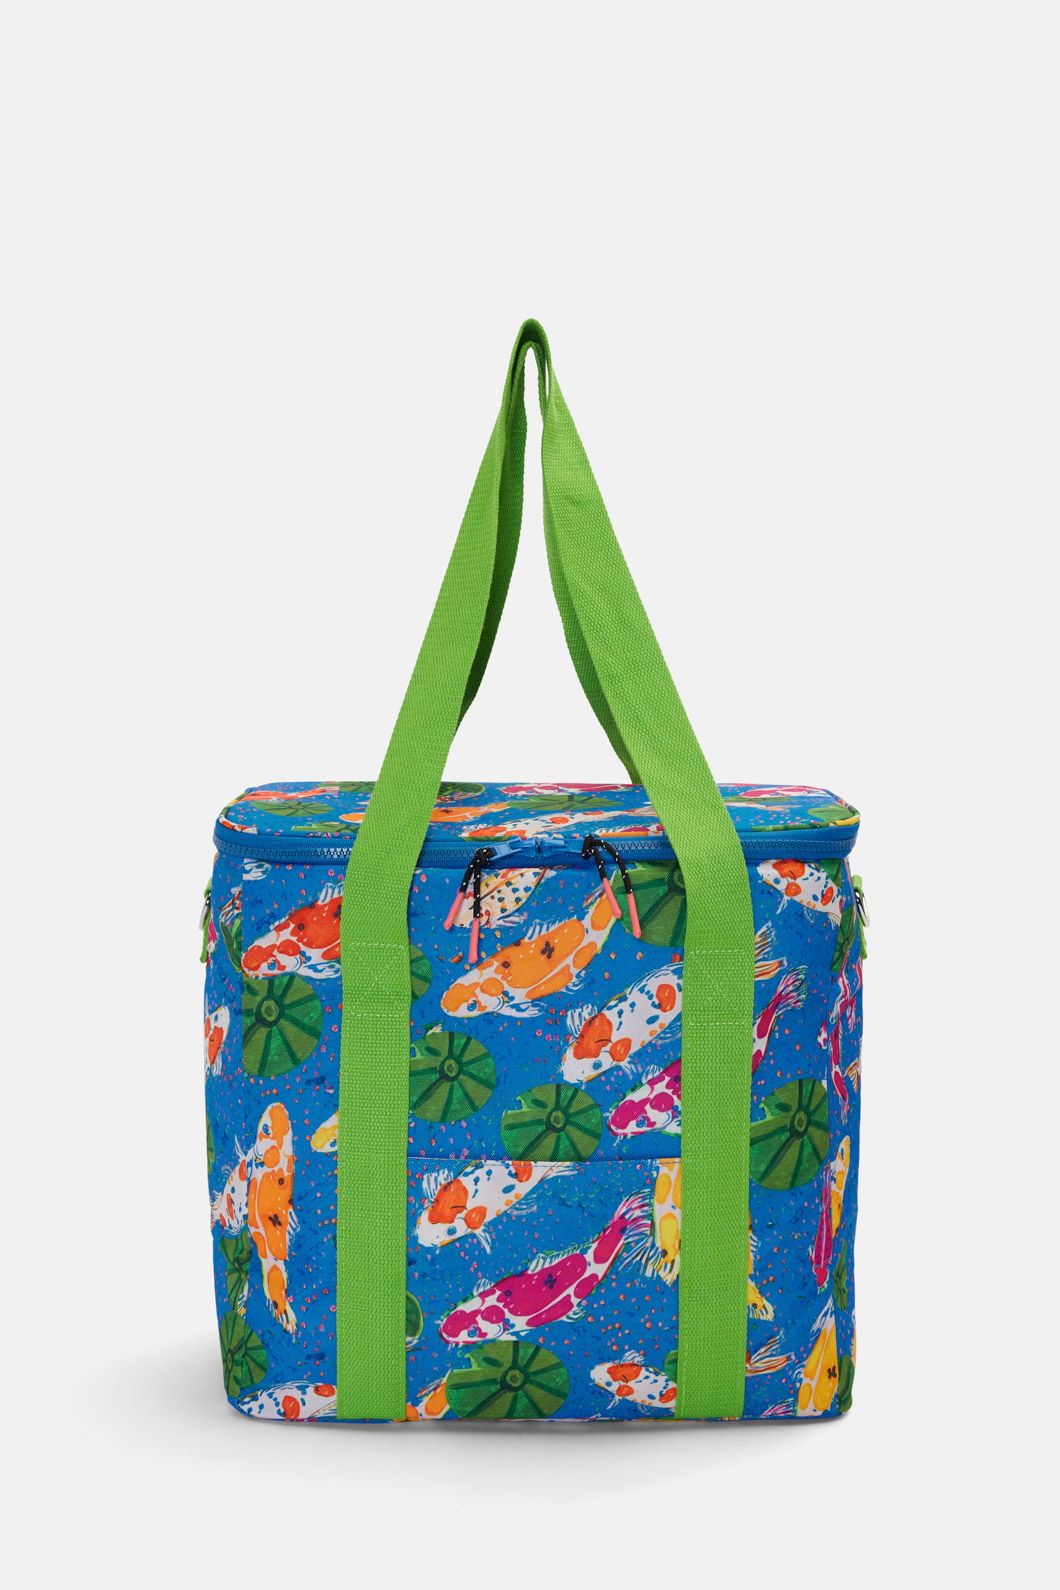 Buy Koi Fish Tote Bag, Hand Embroidered Tote Bag, Eco Friendly Shopping Bag  Online in India - Etsy